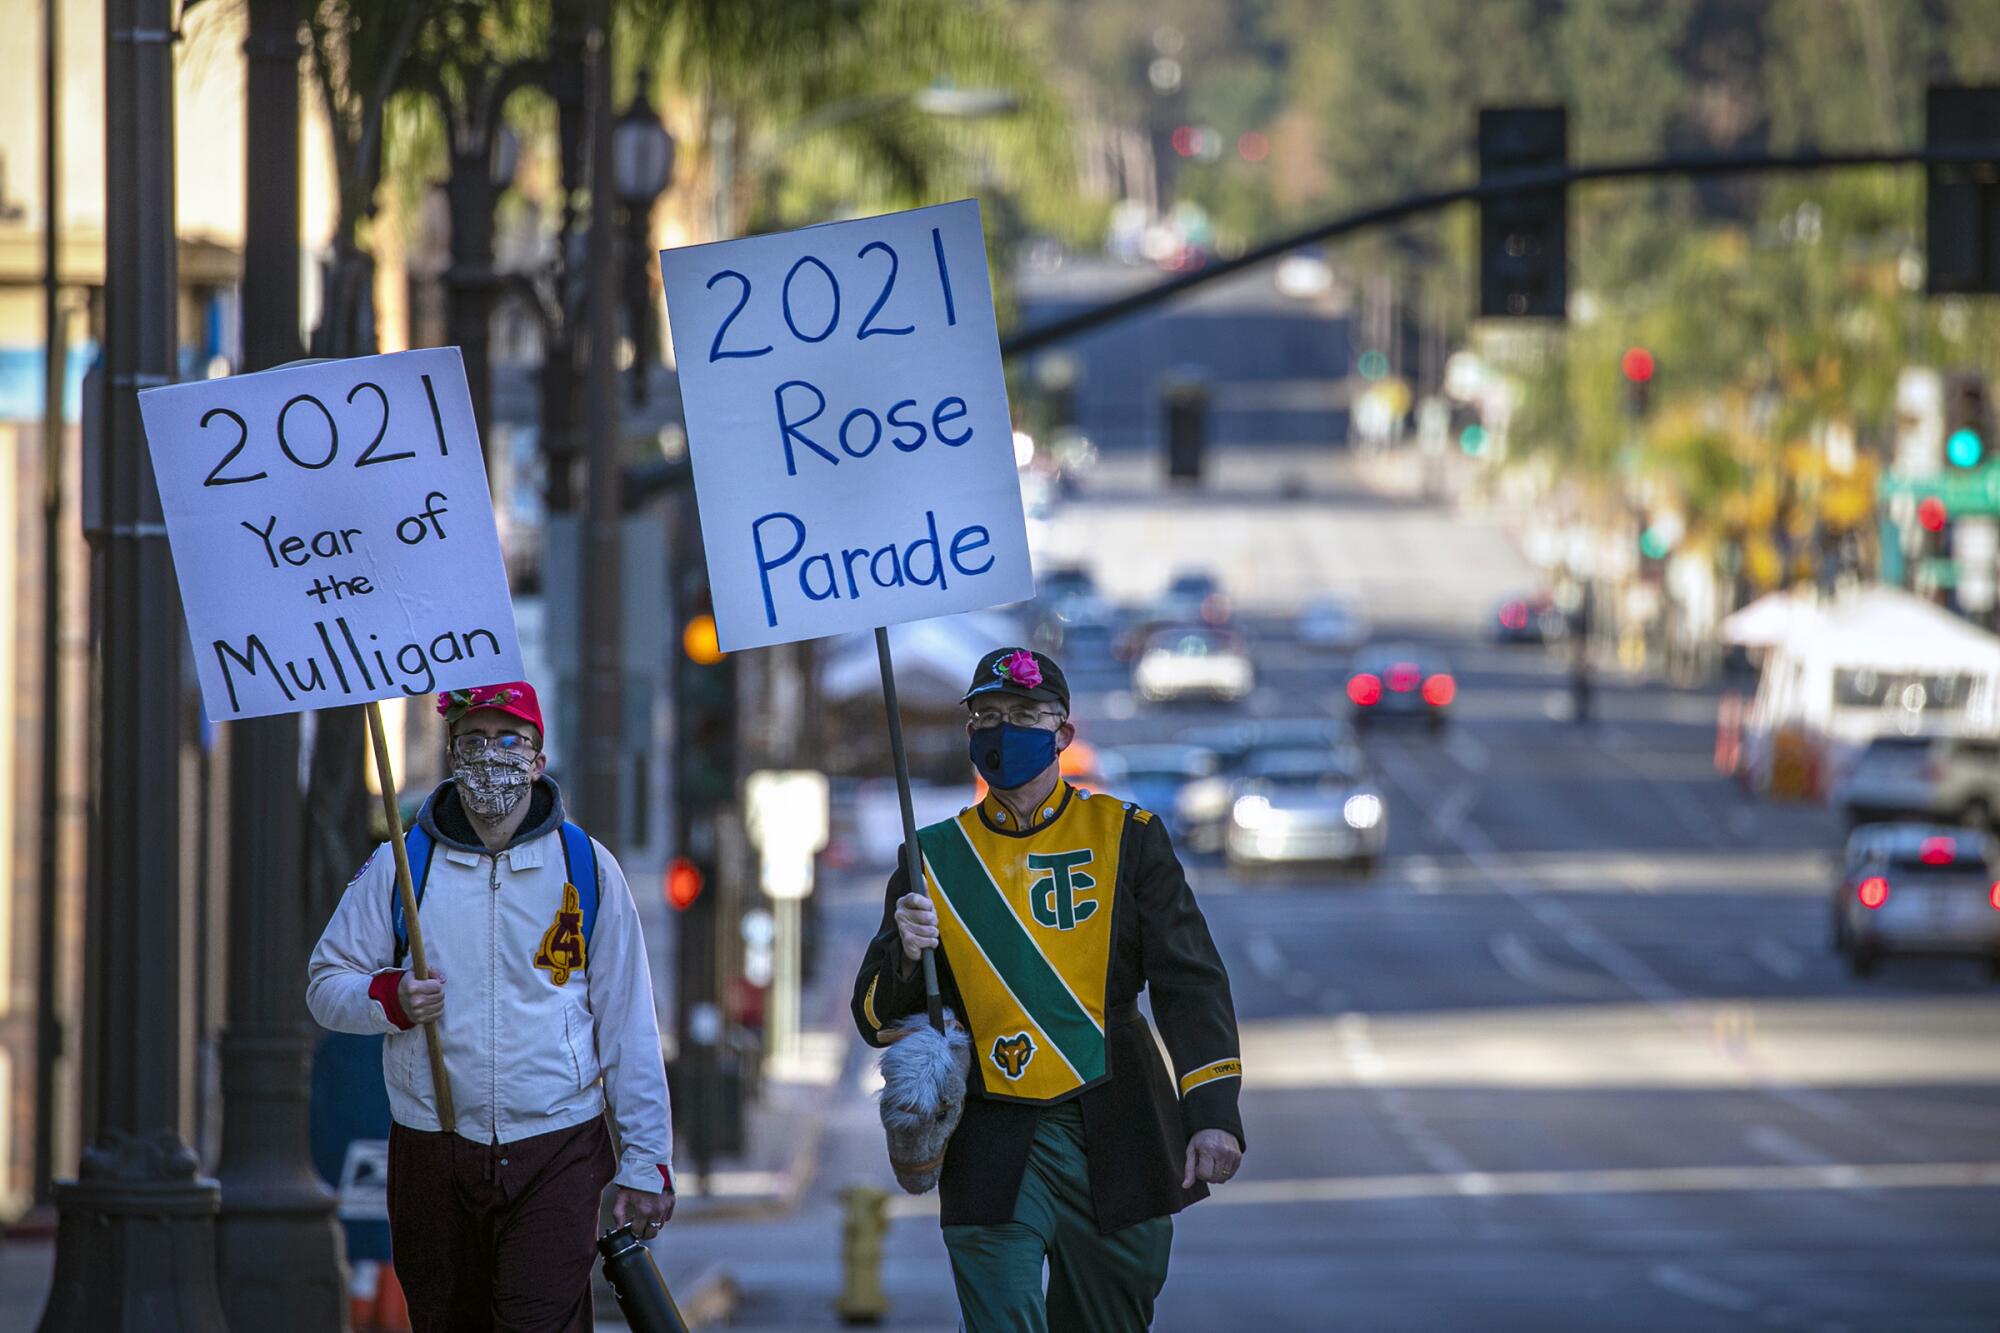 Curtis McKendrick, left, and along with his father, Robert McKendrick, make their own 2021 Rose Parade along Colorado Blvd.